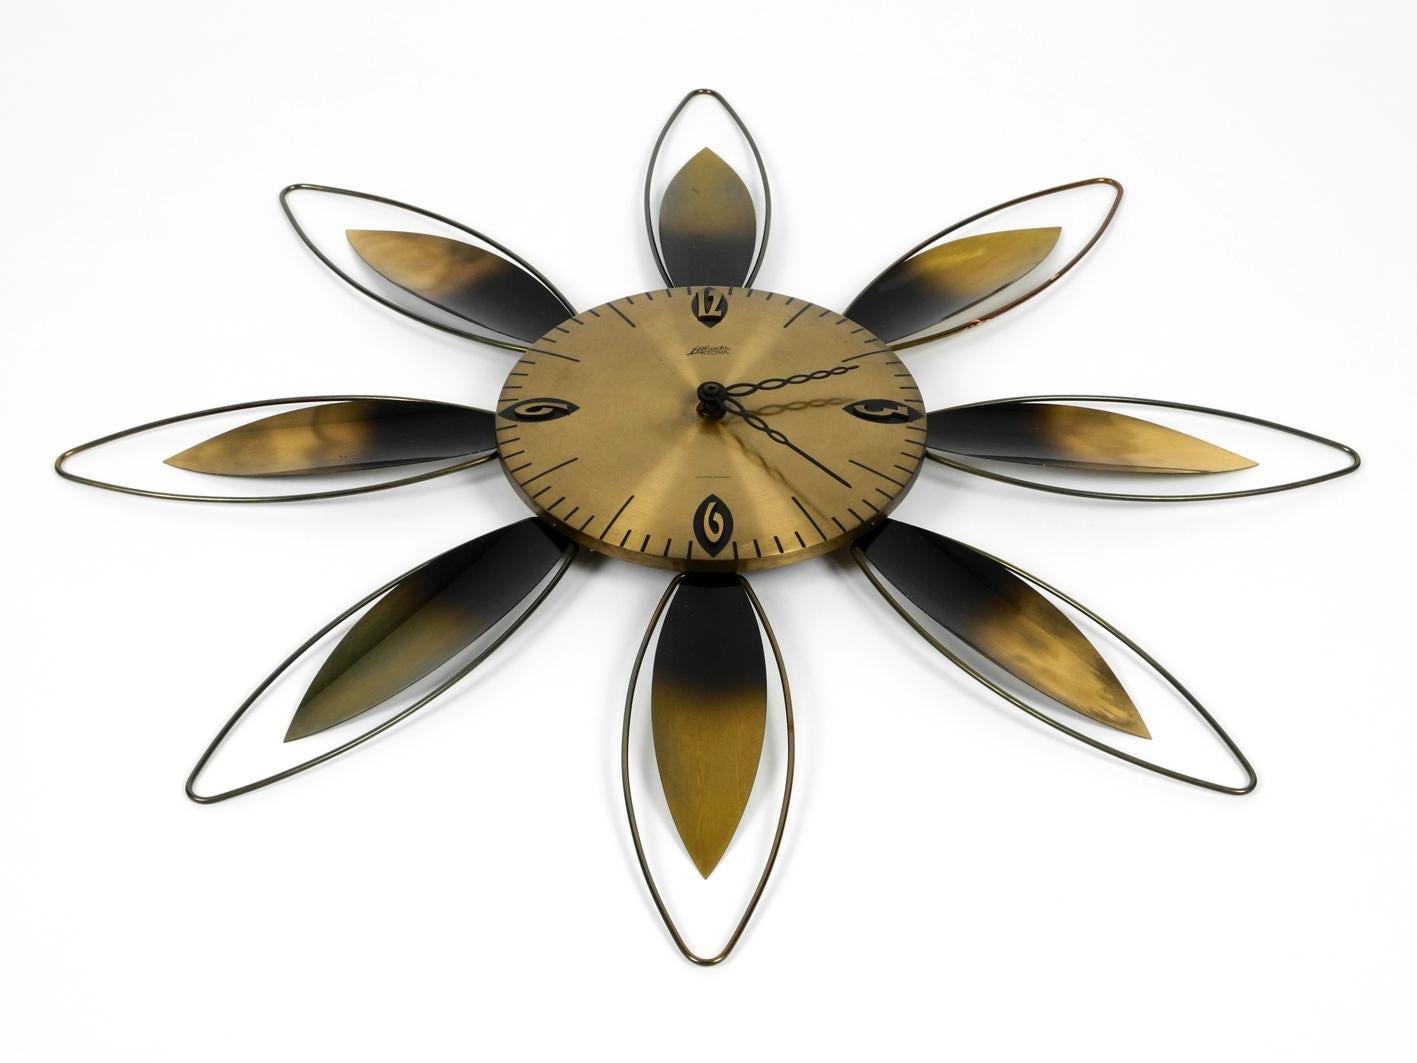 Gorgeous original 1950s Sunburst Atlanta electric wall clock in brass. Made in Germany.
Very nice elaborate midcentury design in the shape of a flower. With a Dugena drive for standard C LR14 batteries. Numerals in typical 50s design. 100% original